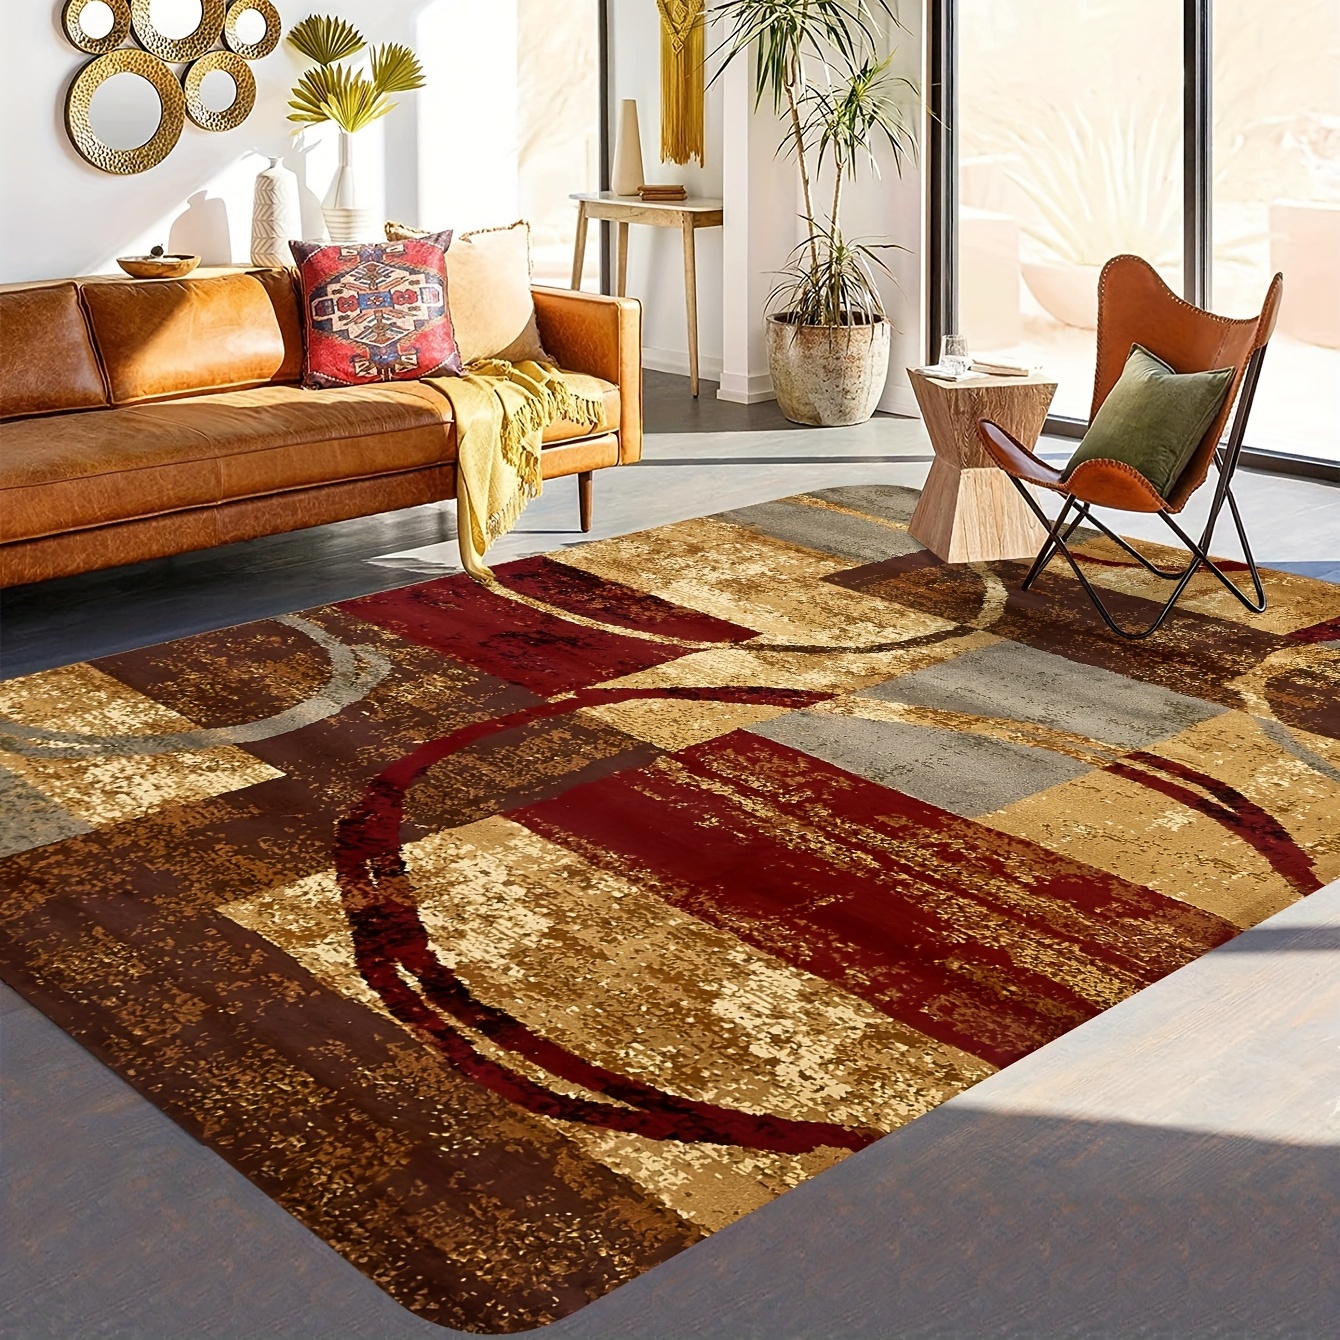 Turkey Big Carpets for Living Room Home Non-slip Washable Large Boho  Geometric Area Rugs for Bedroom Parlor Floor Mat Tapis